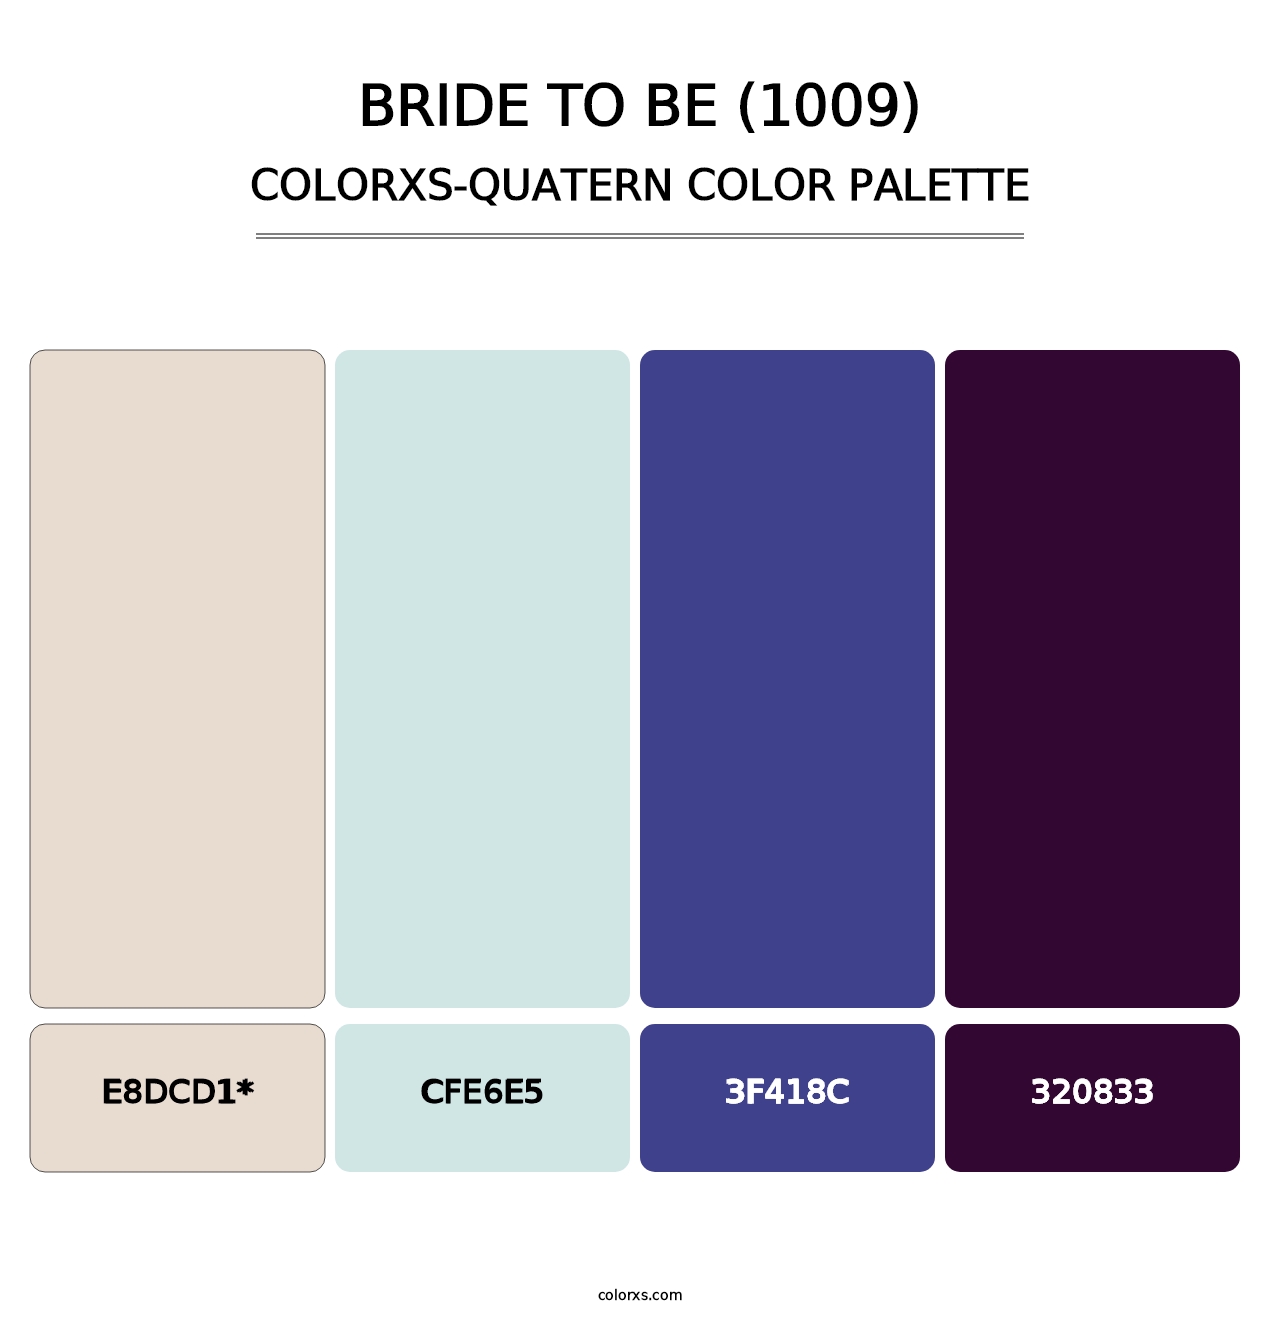 Bride To Be (1009) - Colorxs Quatern Palette